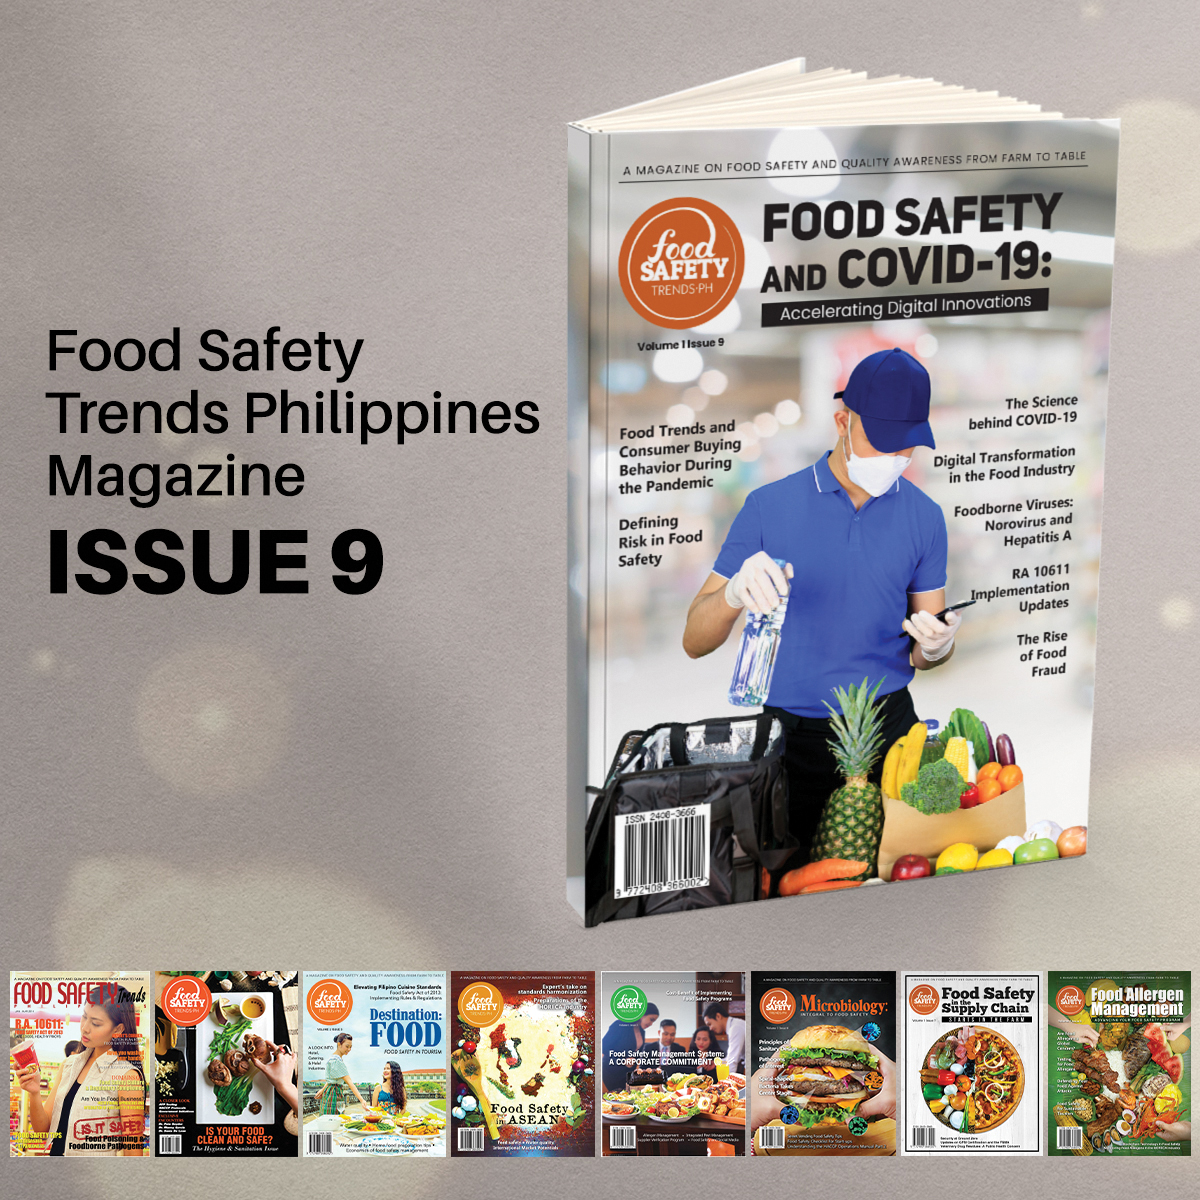 food-safety-trends-philippines-magazine-glenwood-technologies-food-safety-and-covid-19-digital-transformation-photo